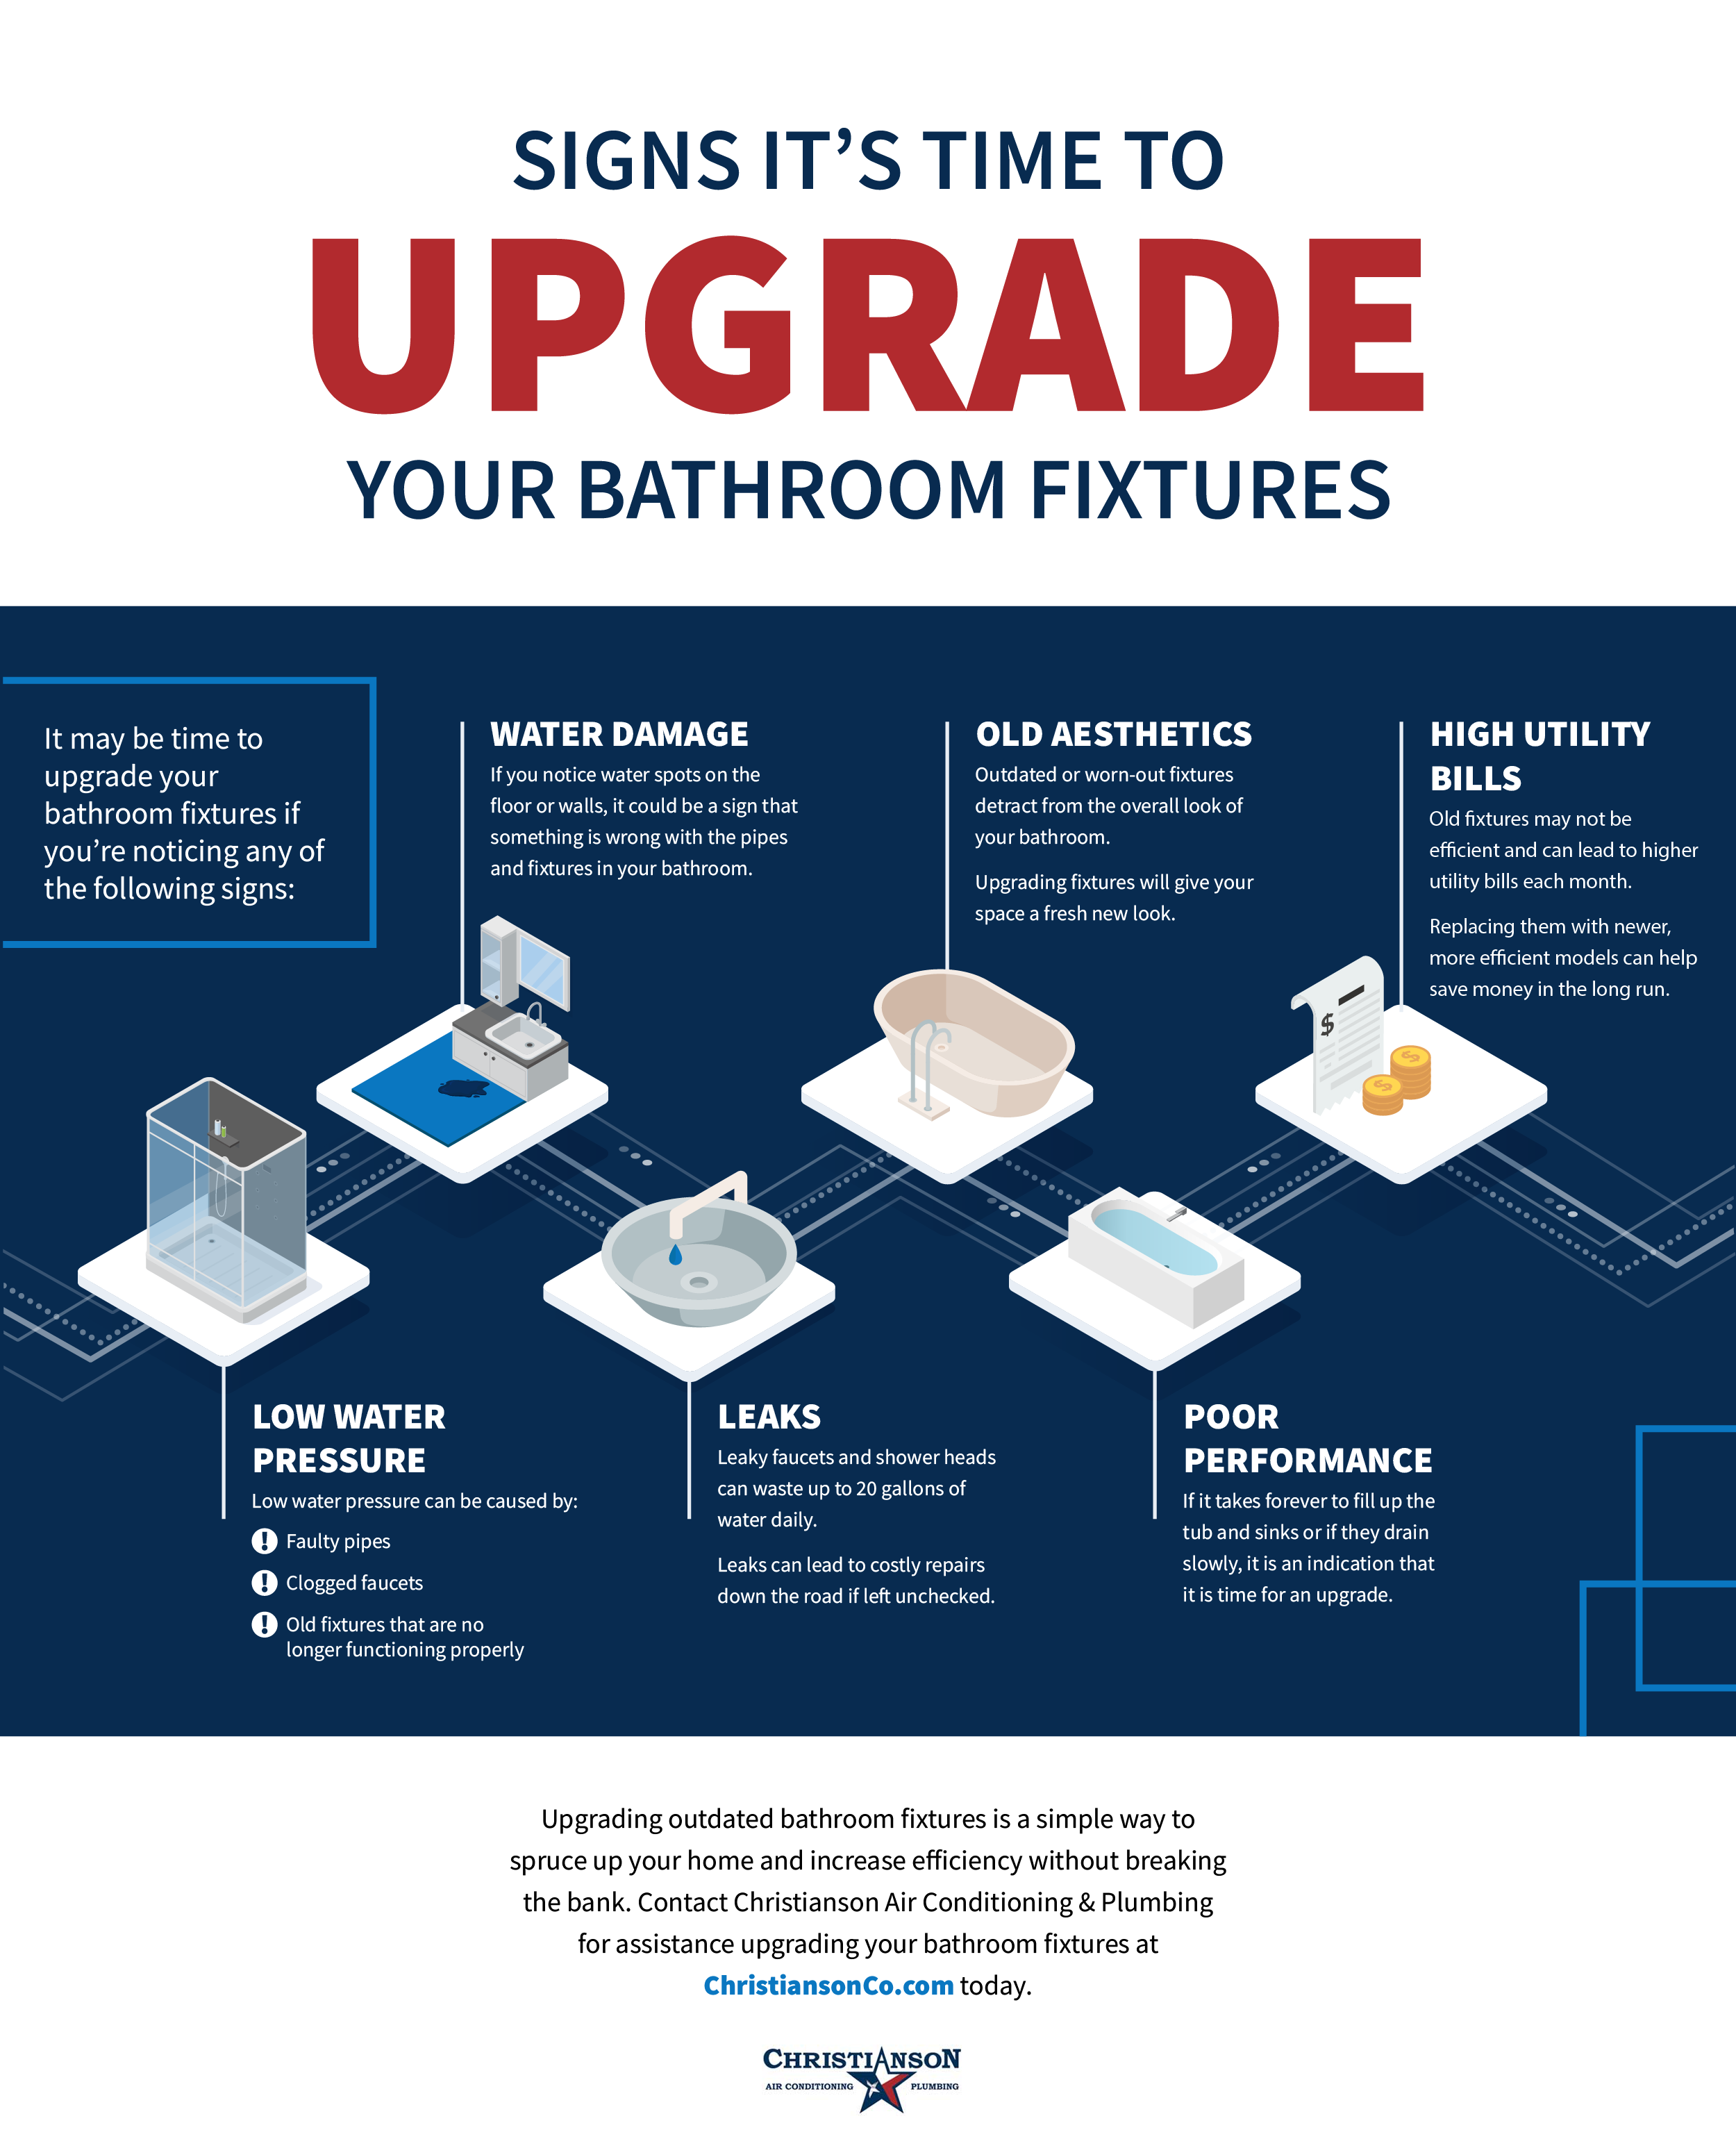 Signs It’s Time to Upgrade Your Bathroom Fixtures Infographic